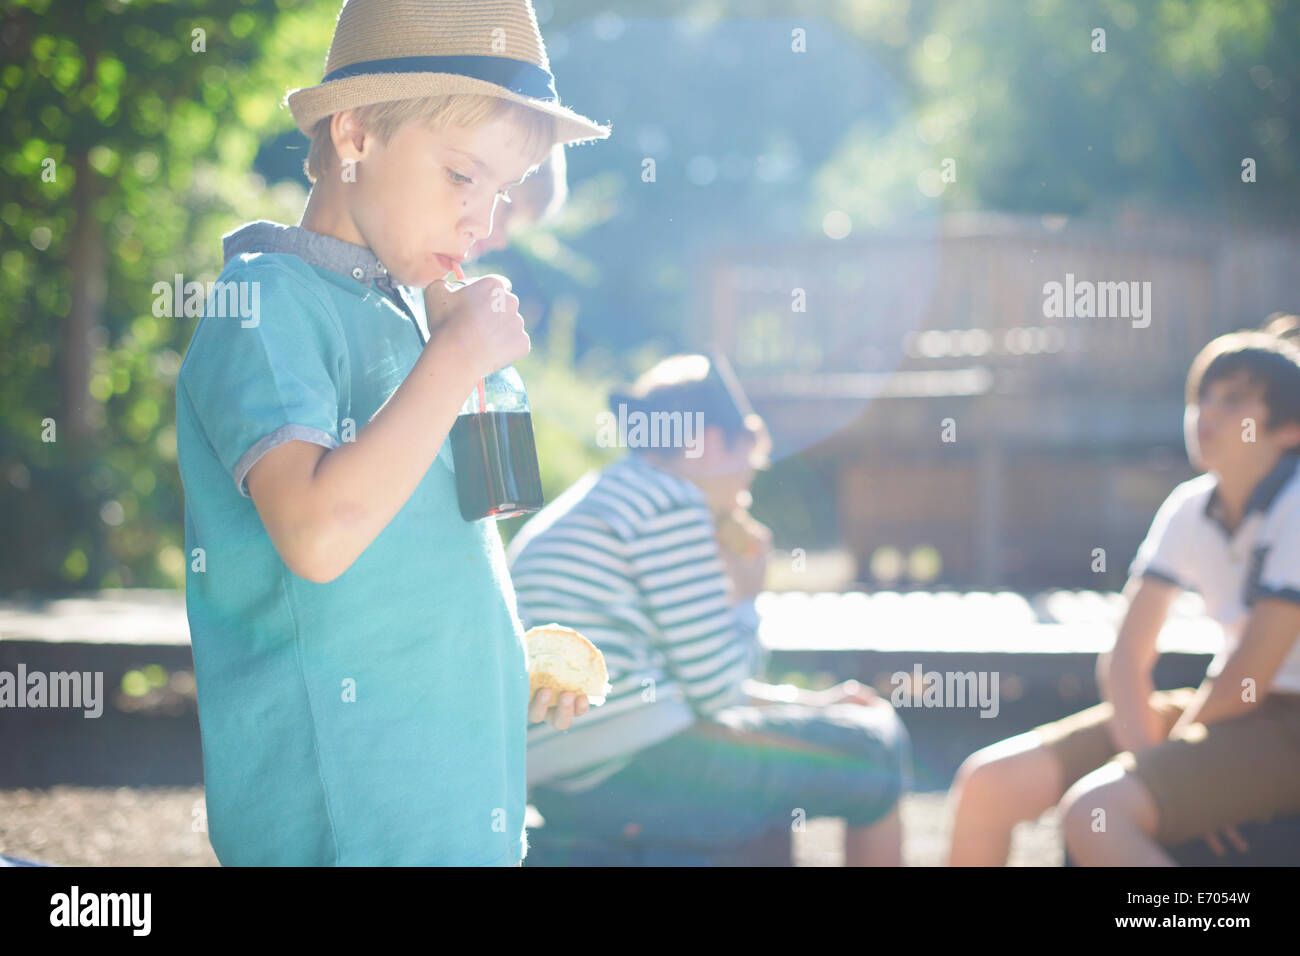 Young boy having lunch in park Stock Photo